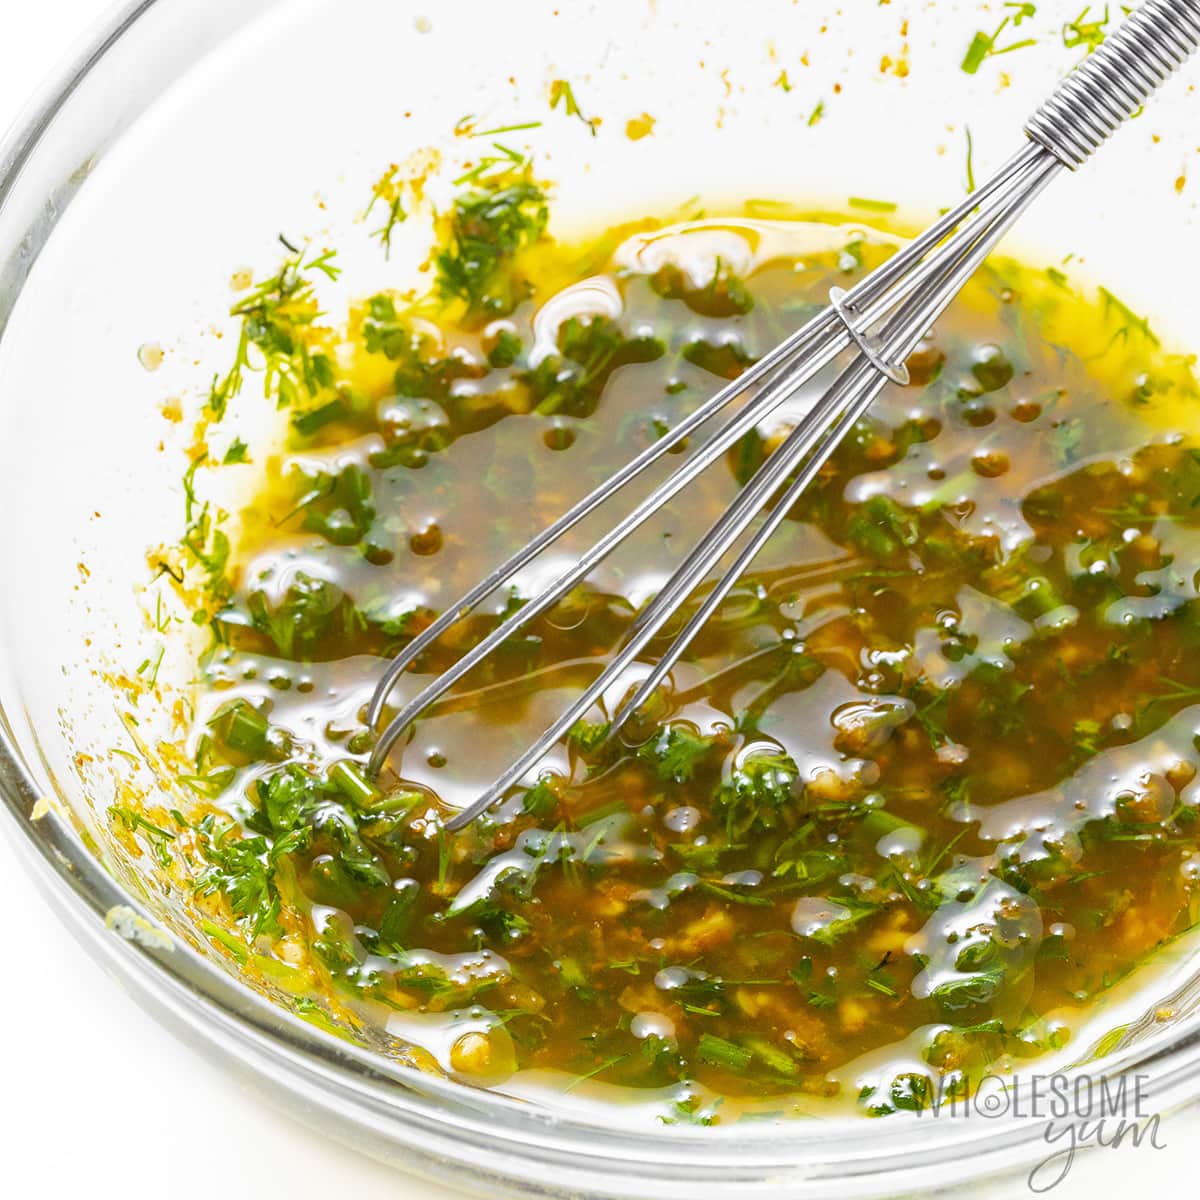 Whisked olive oil and seasonings in a small bowl.